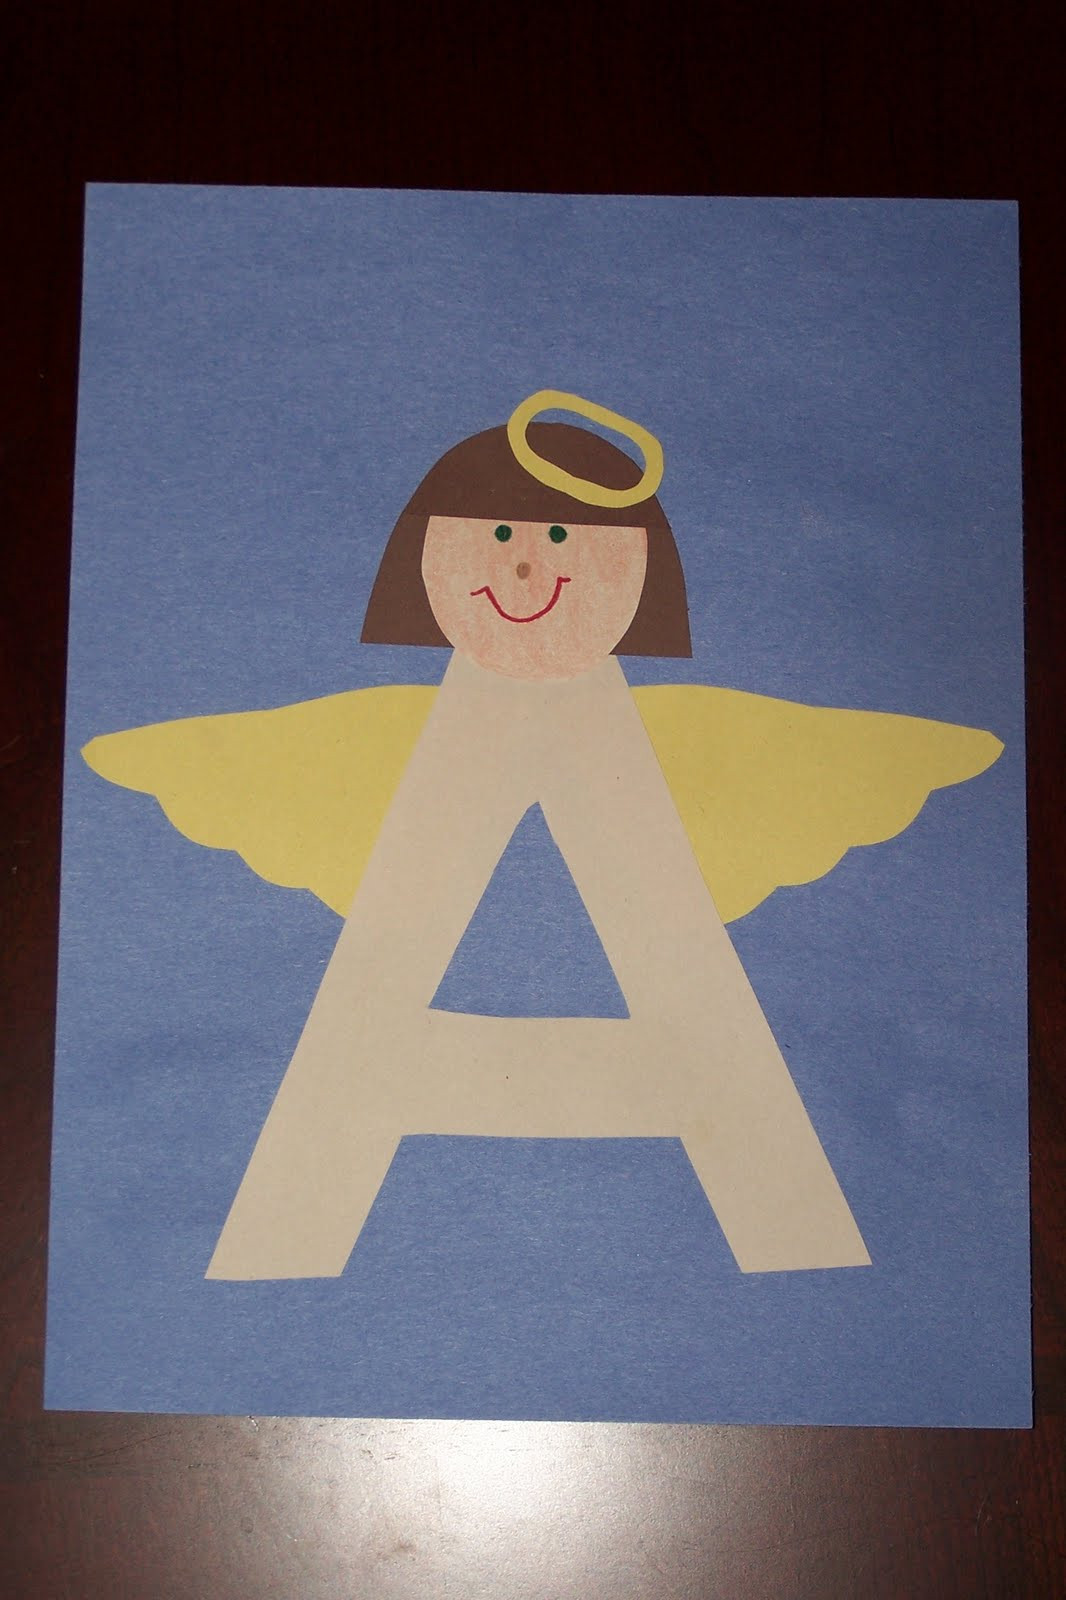 Preschool Crafts Ideas
 The Princess and the Tot Letter Crafts Uppercase